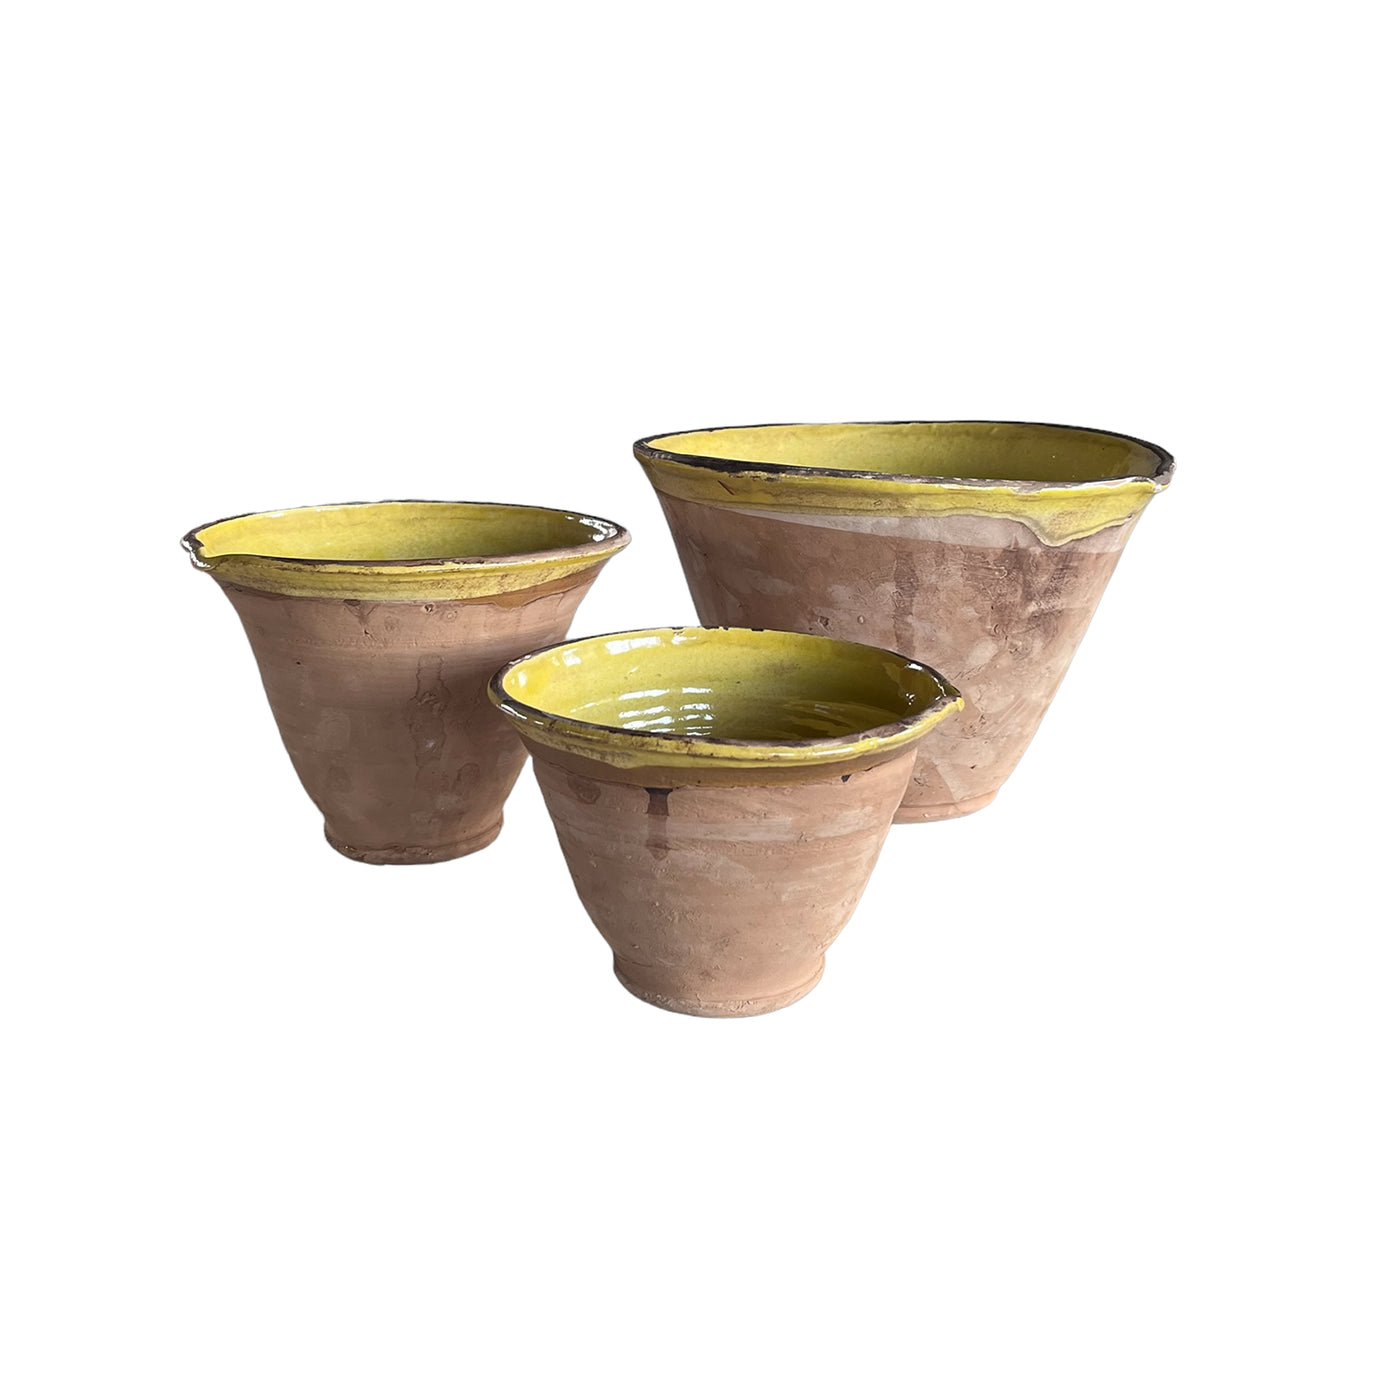 Cottage Crafted Bowls